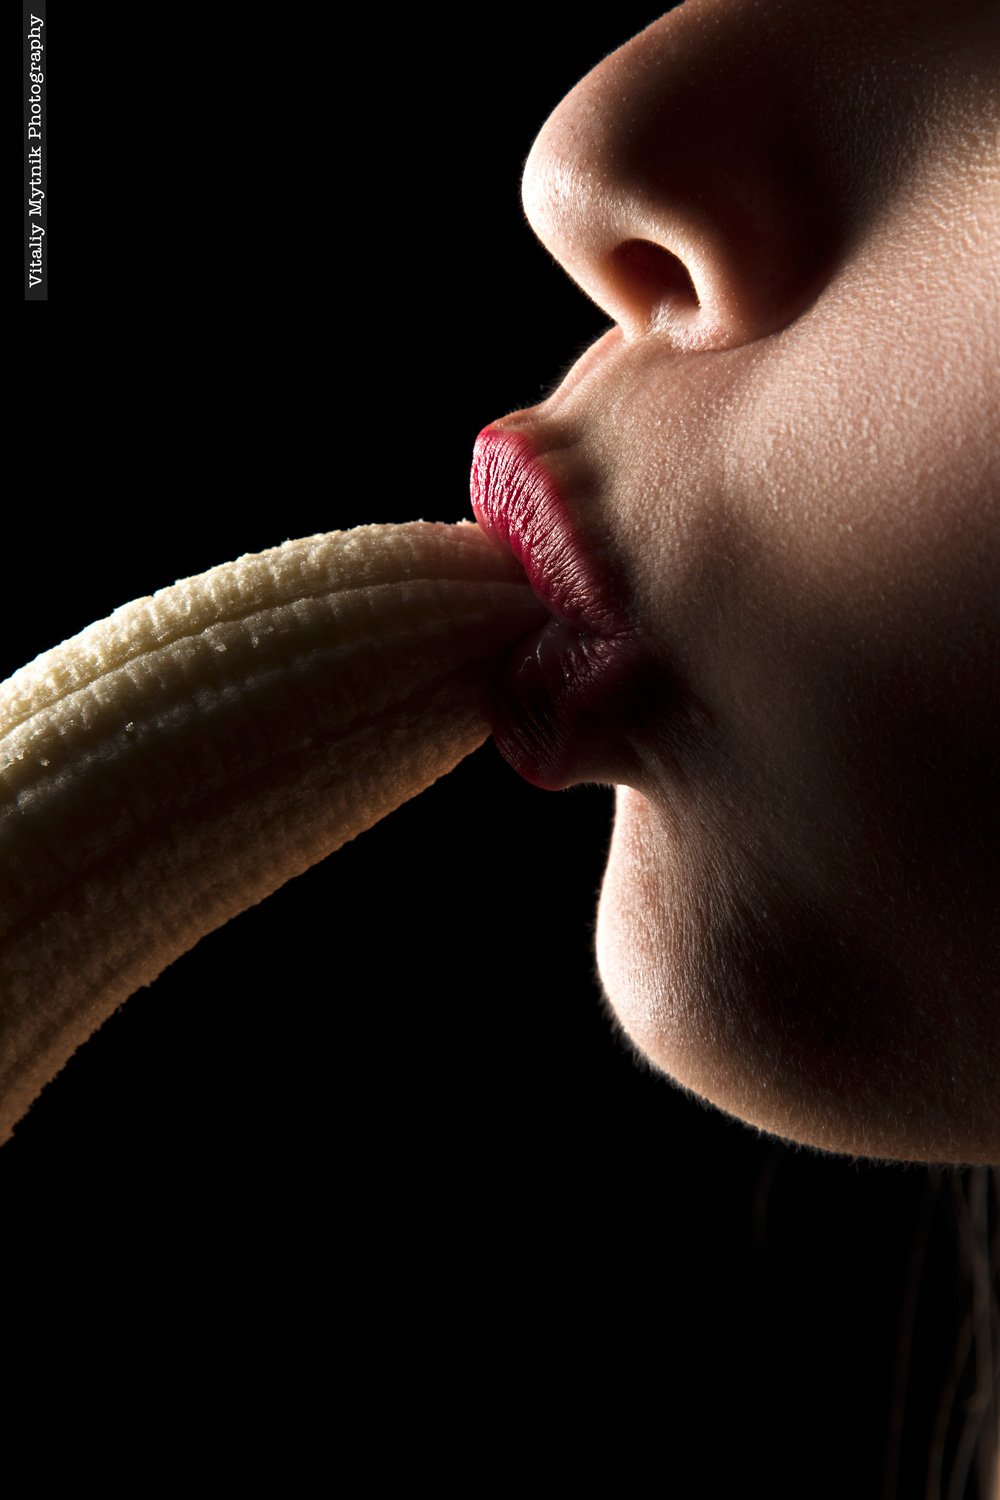 lips, young, sex, sexy, mouth, banana, woman, food, girl, sexual, white, erotic, yellow, adult, blowjob, ripe, health, fresh, diet, eat, licking, healthy, job, face, beautiful, female, blow, oral, male, passion, man, object, organic, isolated, nutrient, n, Виталий Мытник